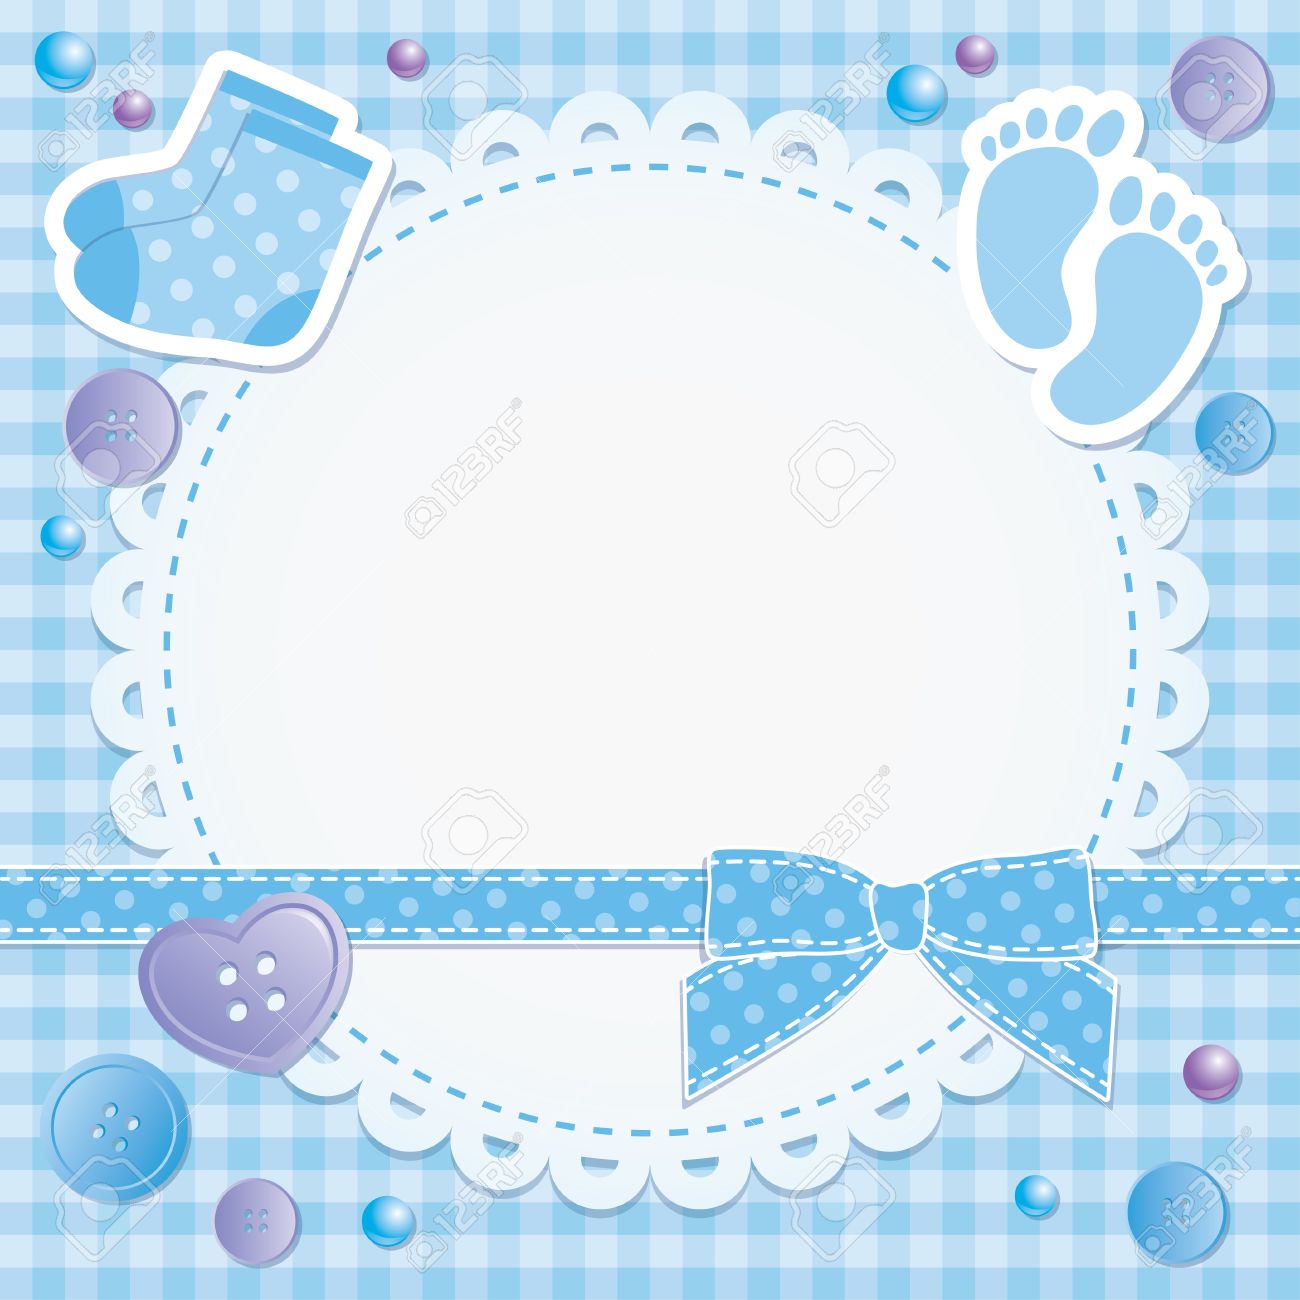 free baby clipart borders frames - photo #40